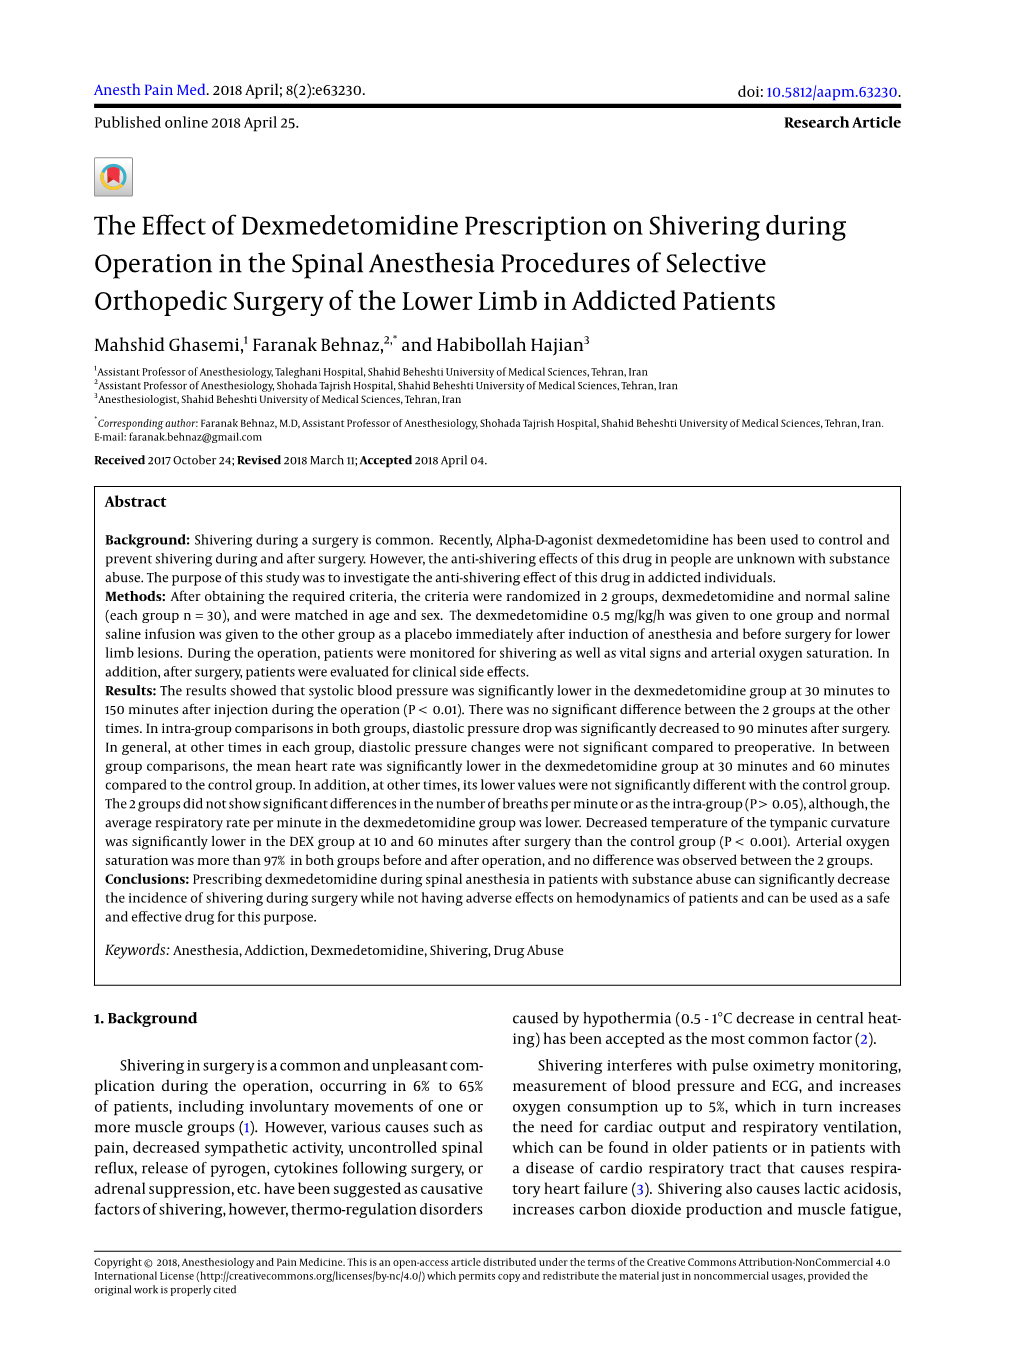 The Effect of Dexmedetomidine Prescription on Shivering During